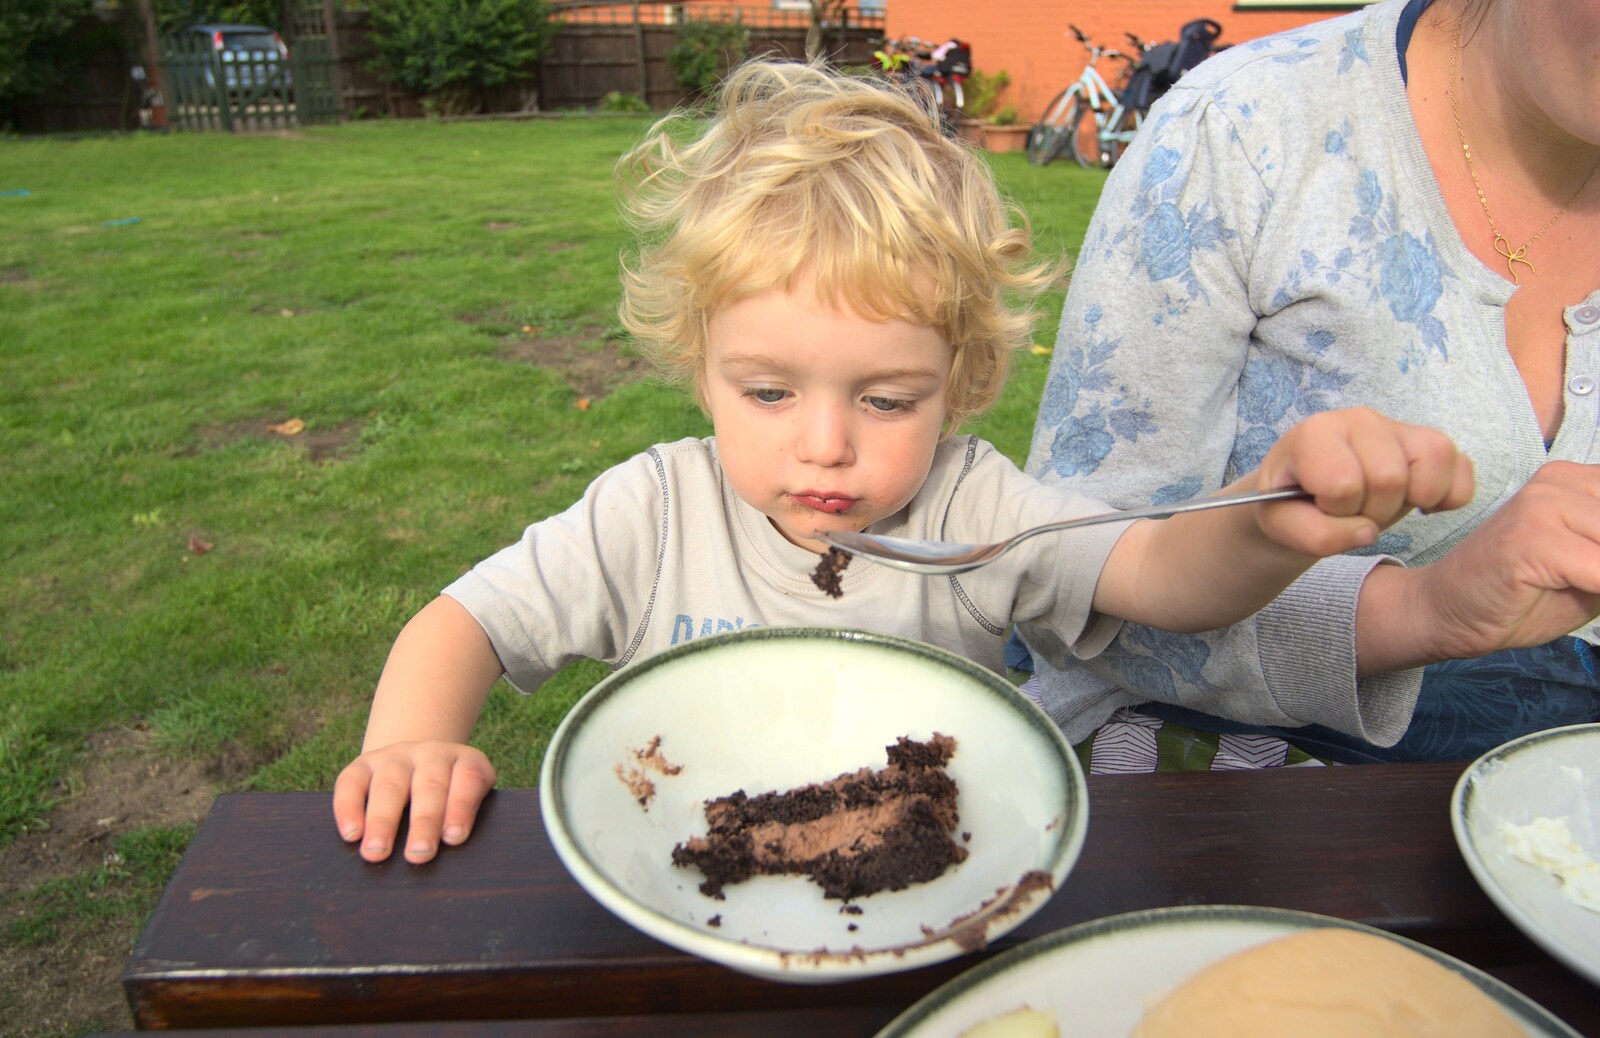 Fred considers some chocolate cake from Barbeque at the Swan Inn, Brome, Suffolk - 5th August 2011